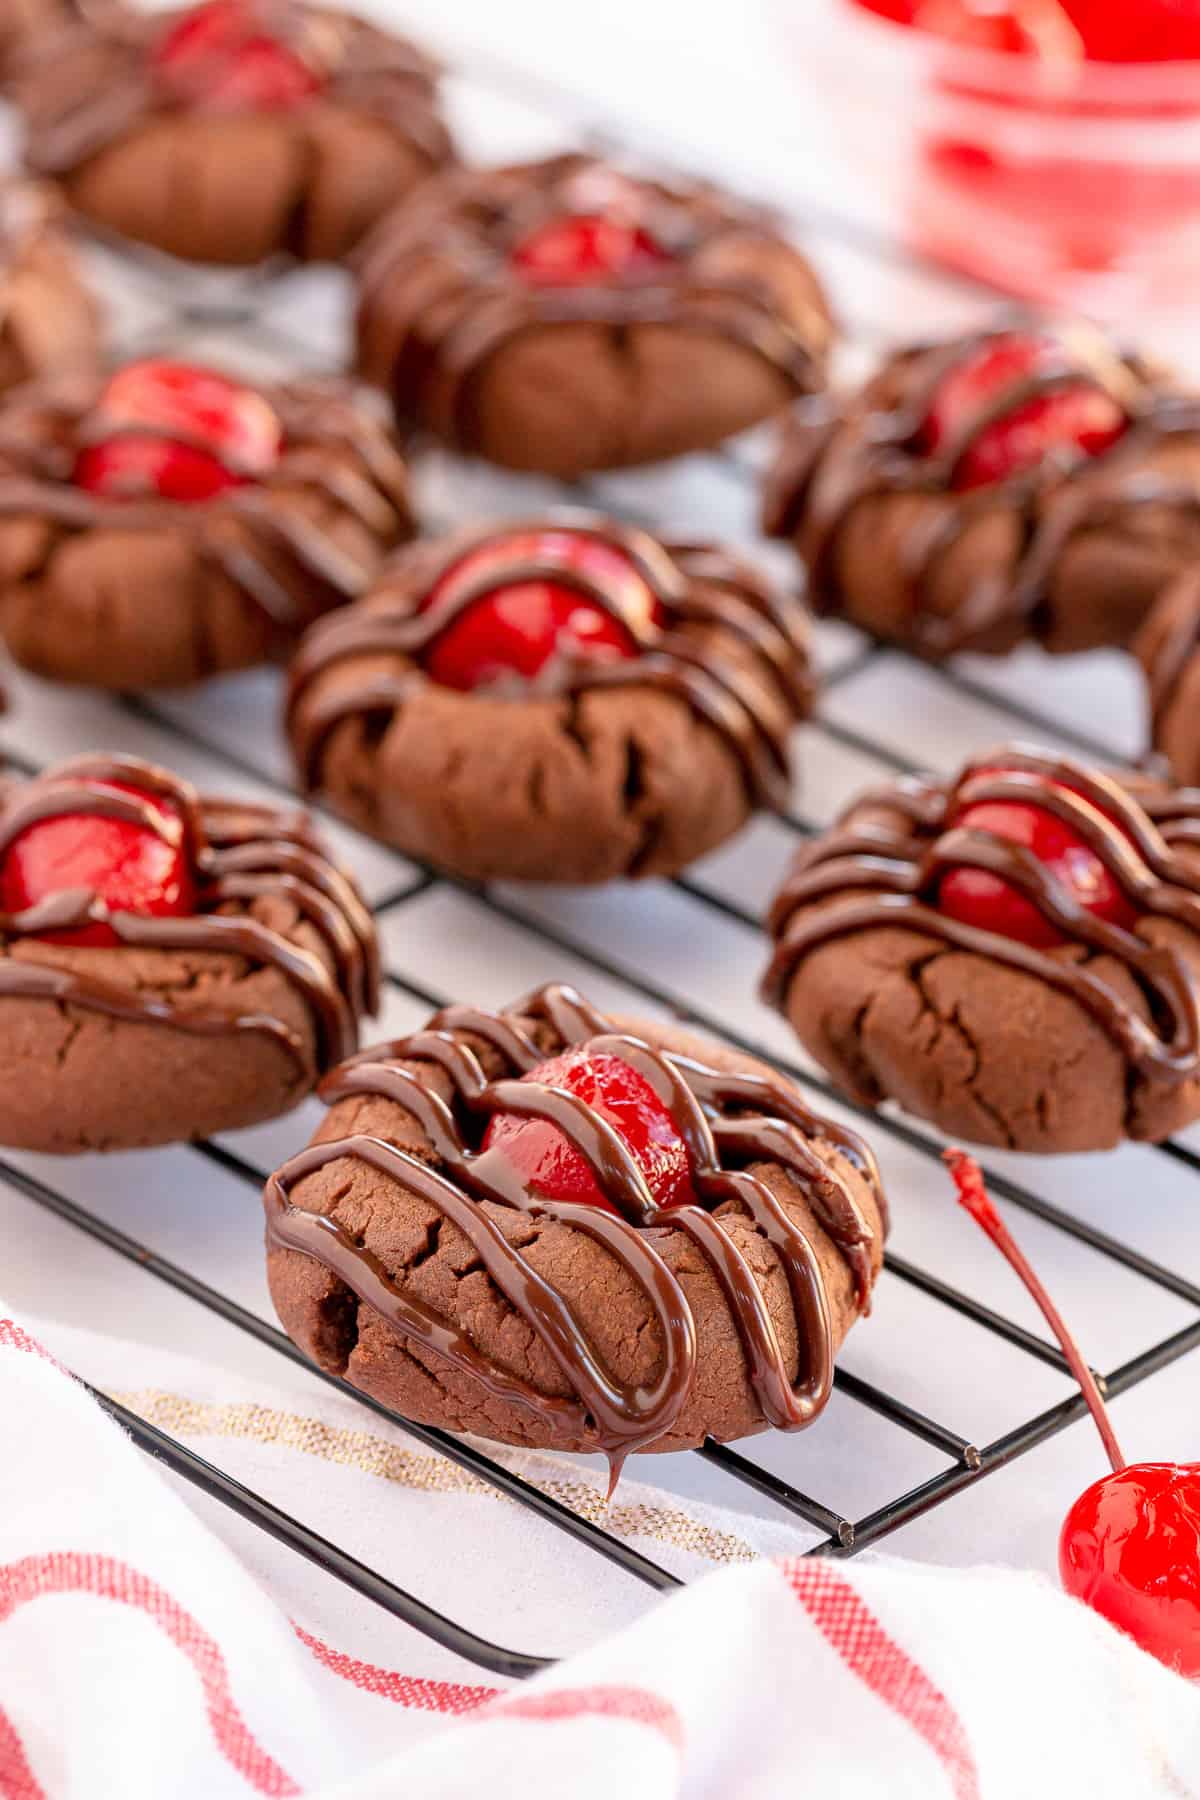 Chocolate cookies with maraschino cherries and frosting on a wire rack.